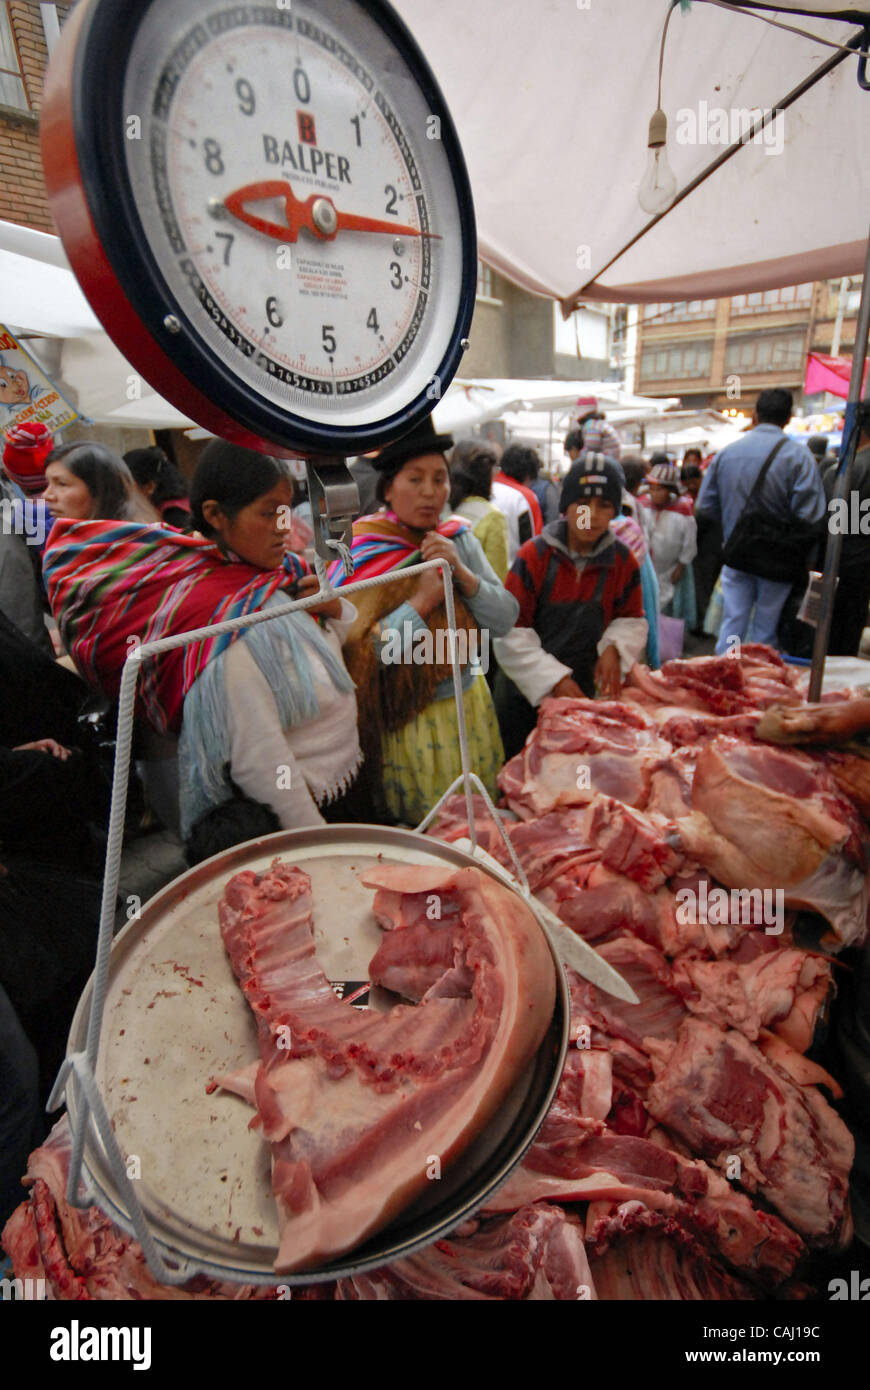 Dec 31, 2007 - La Paz, Bolivia - Pork meat selling in La Paz Garita de Lima's street market.  Every 31st December in La Paz, thousands of dead pigs are brought to the city to be sold, coming from Cochabamba, Santa Cruz and all La Paz areas. The bolivian tradition to eat pork to celebrate the new yea Stock Photo